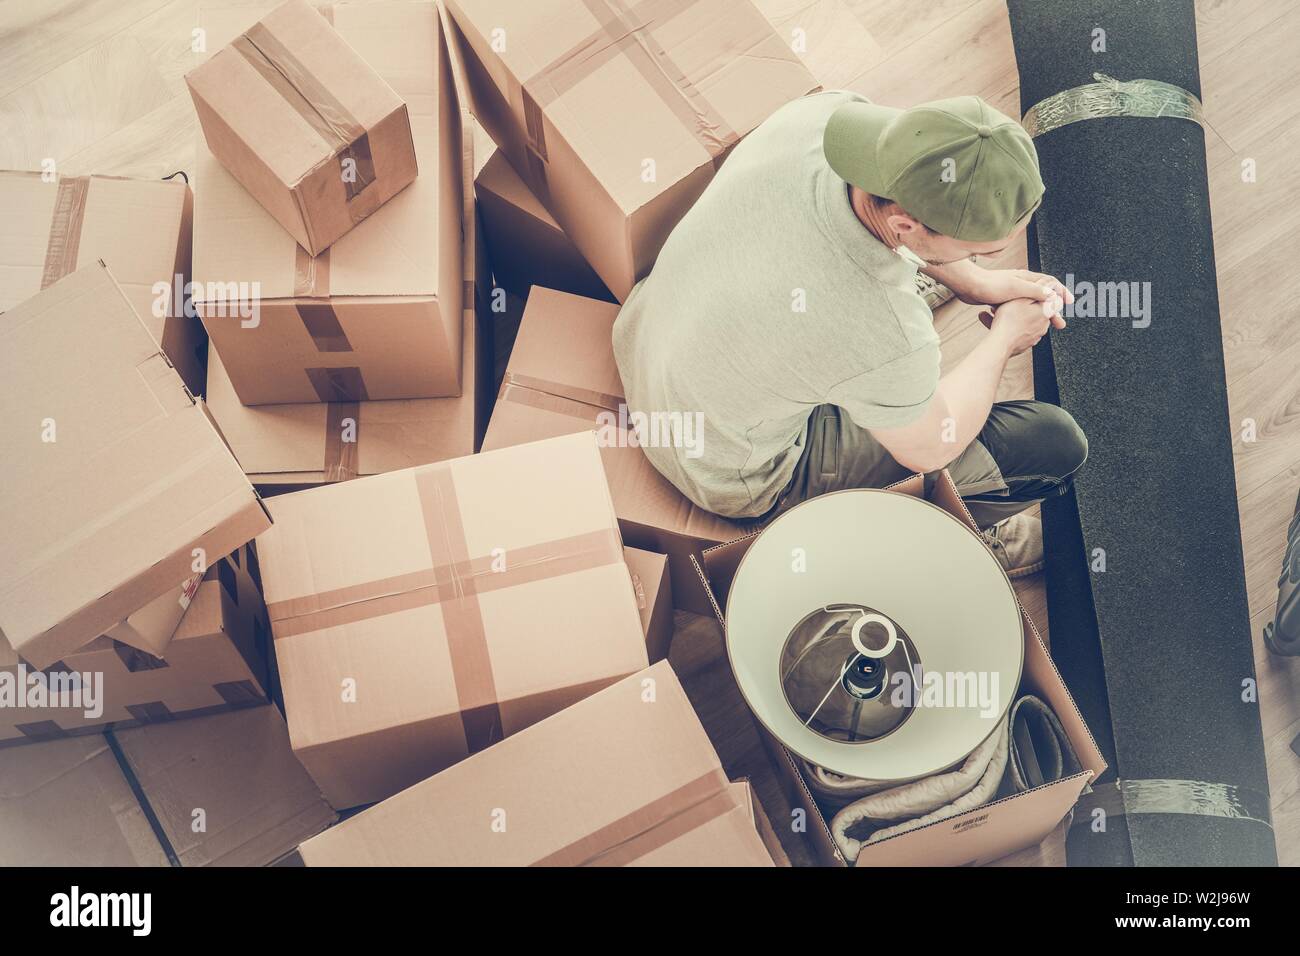 Caucasian Men Moving Out After Divorce. Seating on a Boxes with His Staff Awaiting Moving Company. Stock Photo